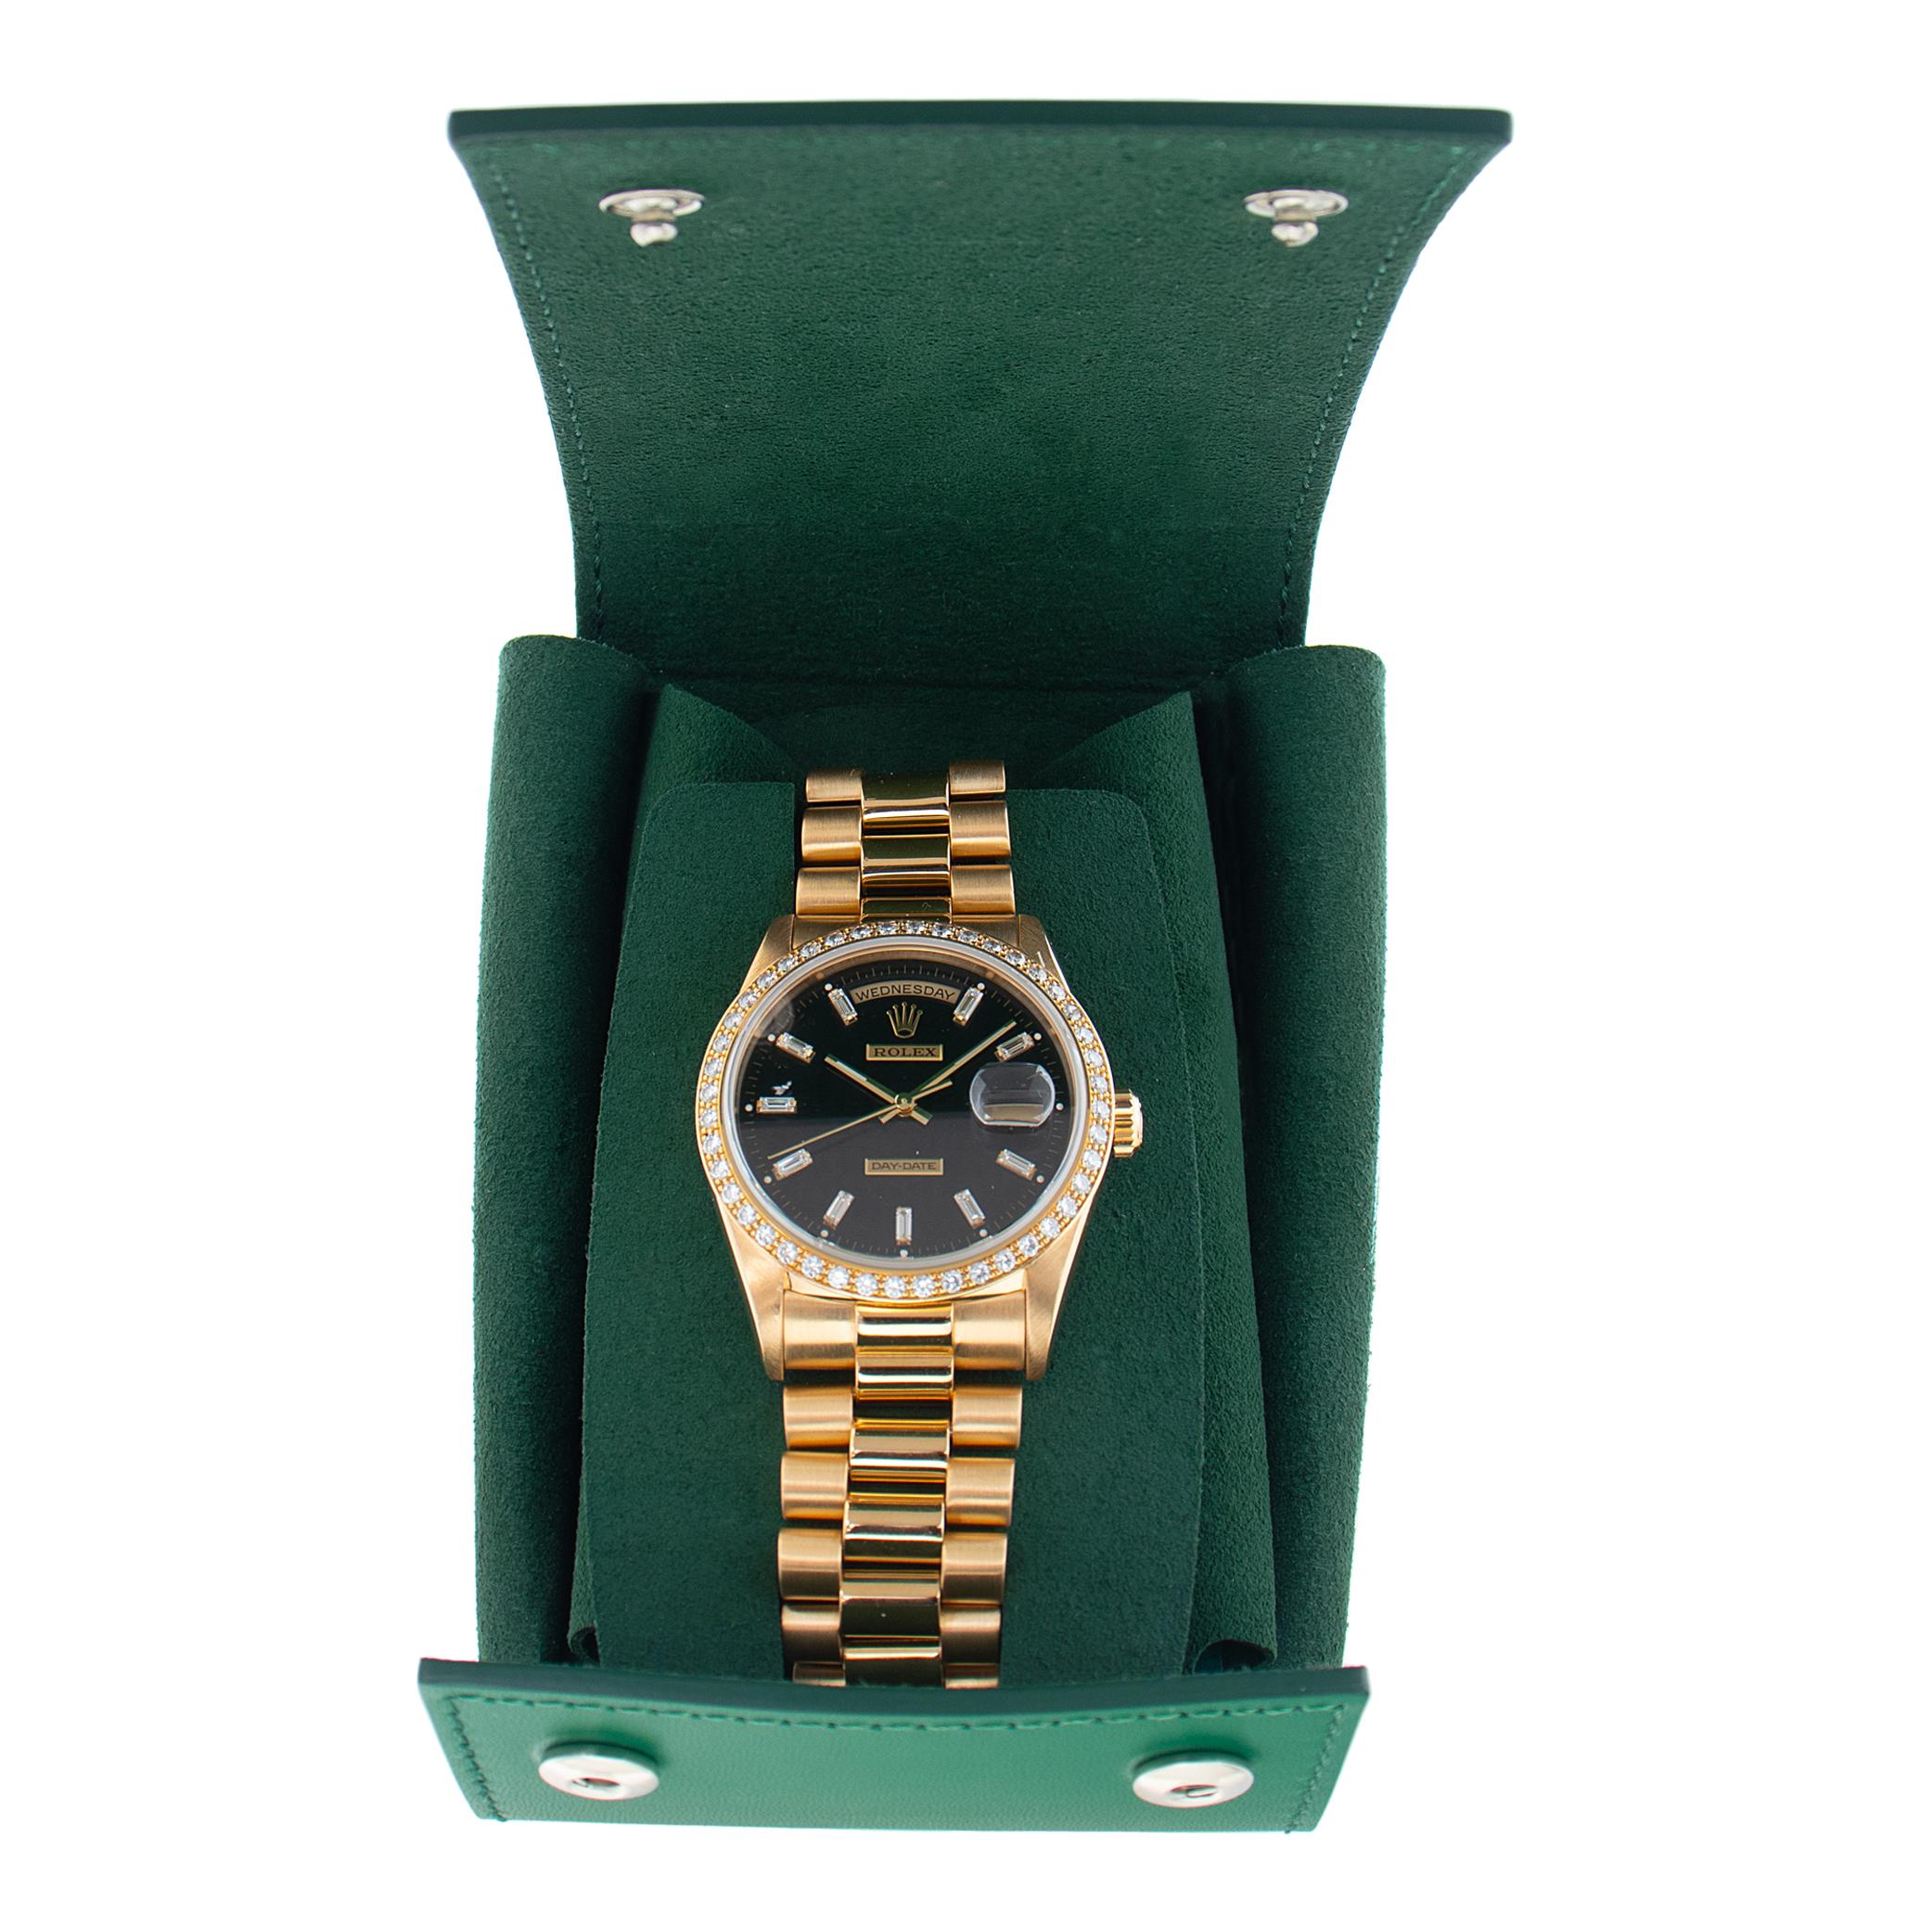 Men's Rolex Day-Date 18k yellow gold Automatic Wristwatch Ref 18238 For Sale